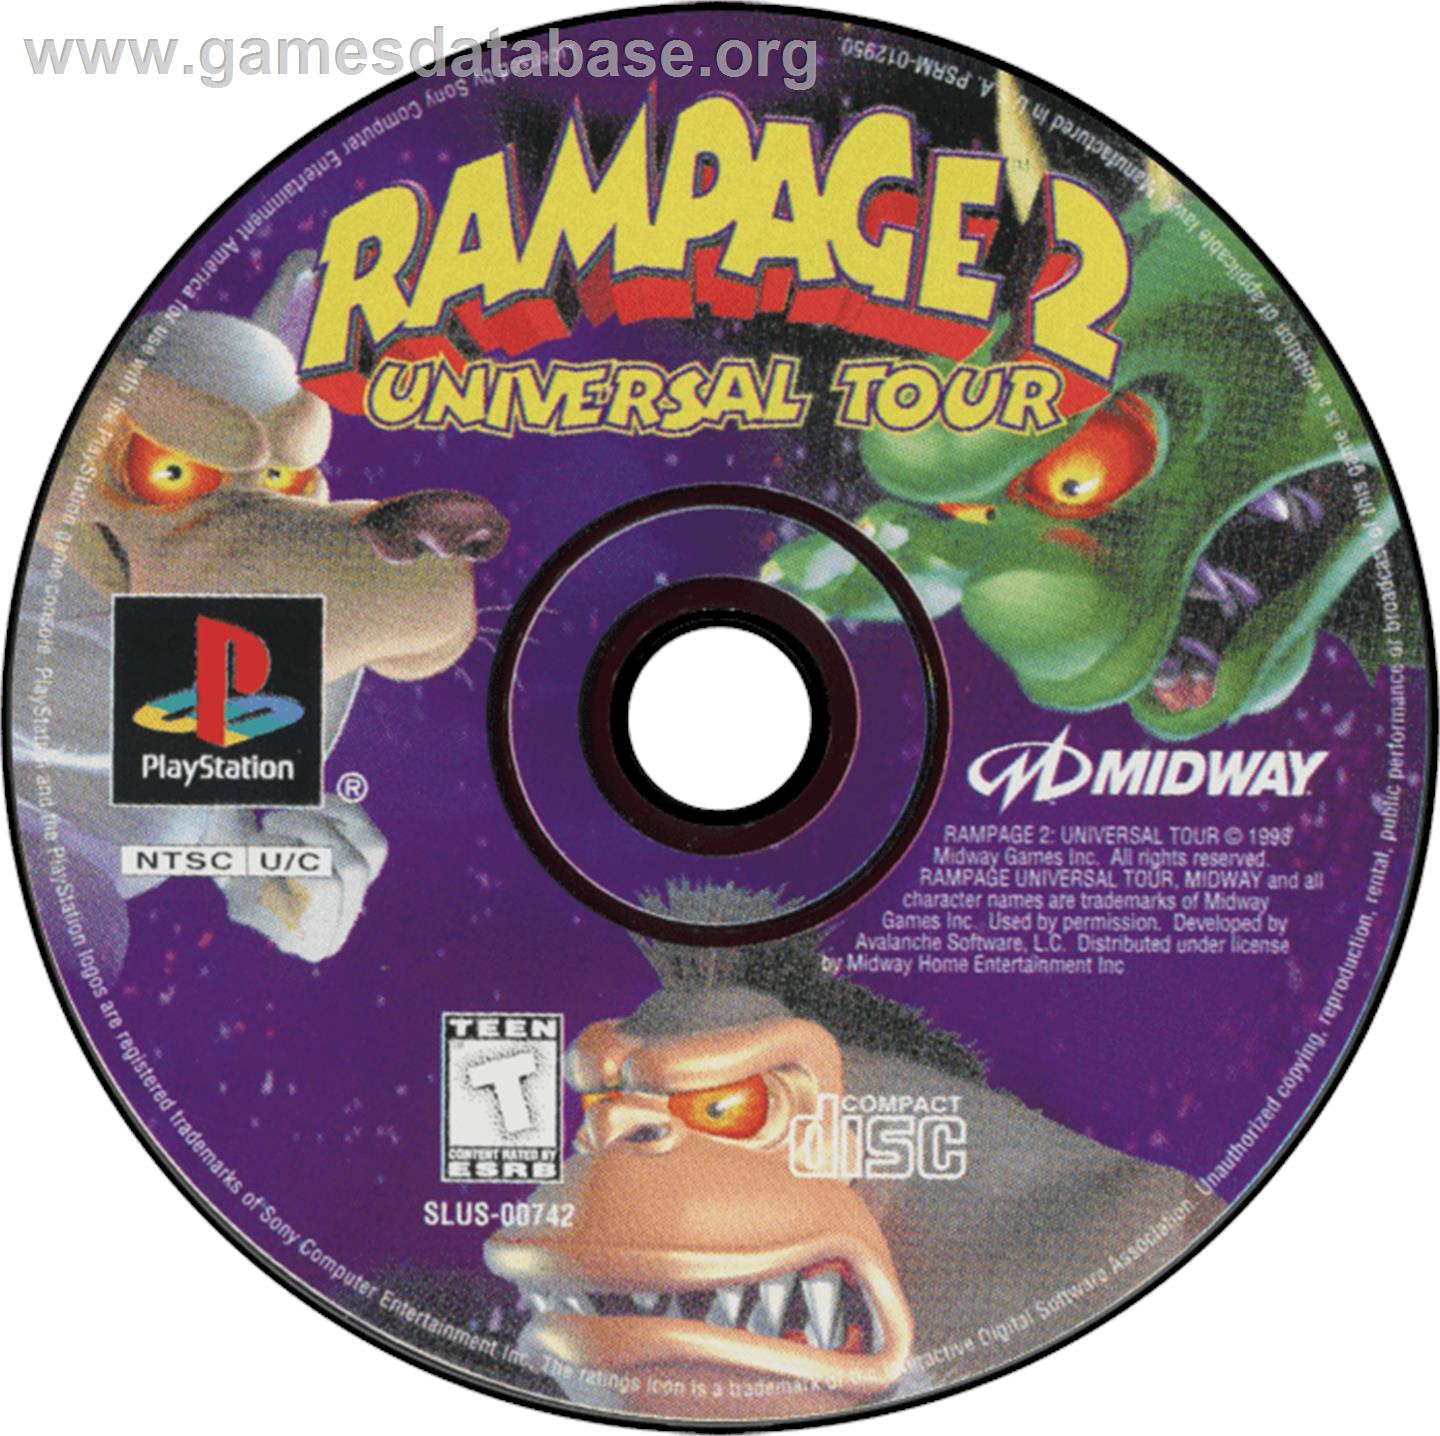 Rampage 2: Universal Tour - Sony Playstation - Artwork - Disc